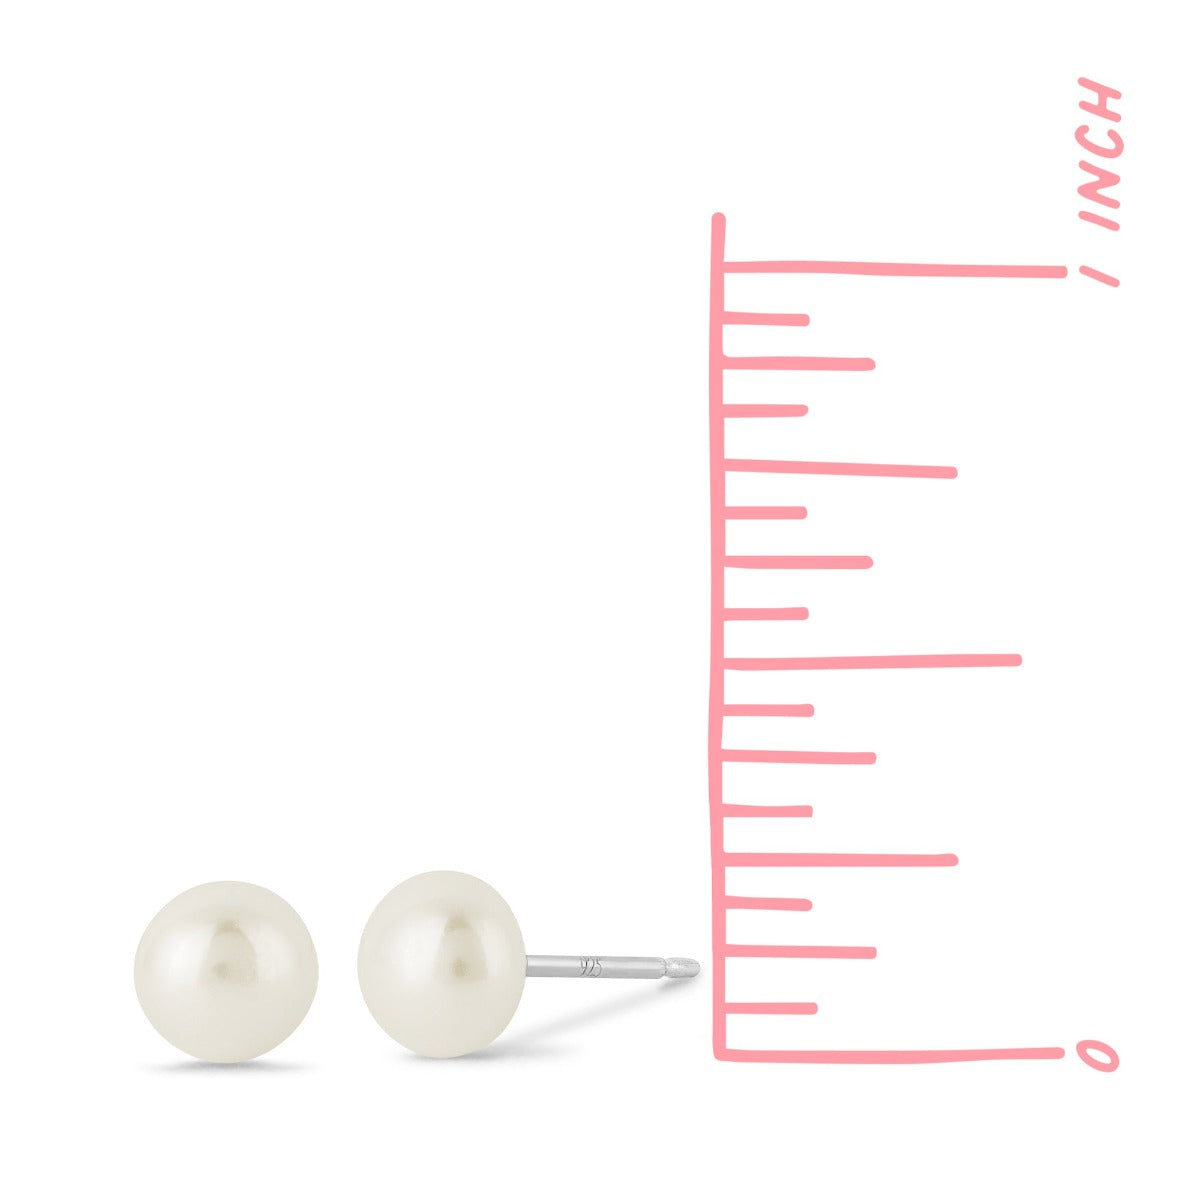 Boma Sterling Silver Post Earring - White Pearl    